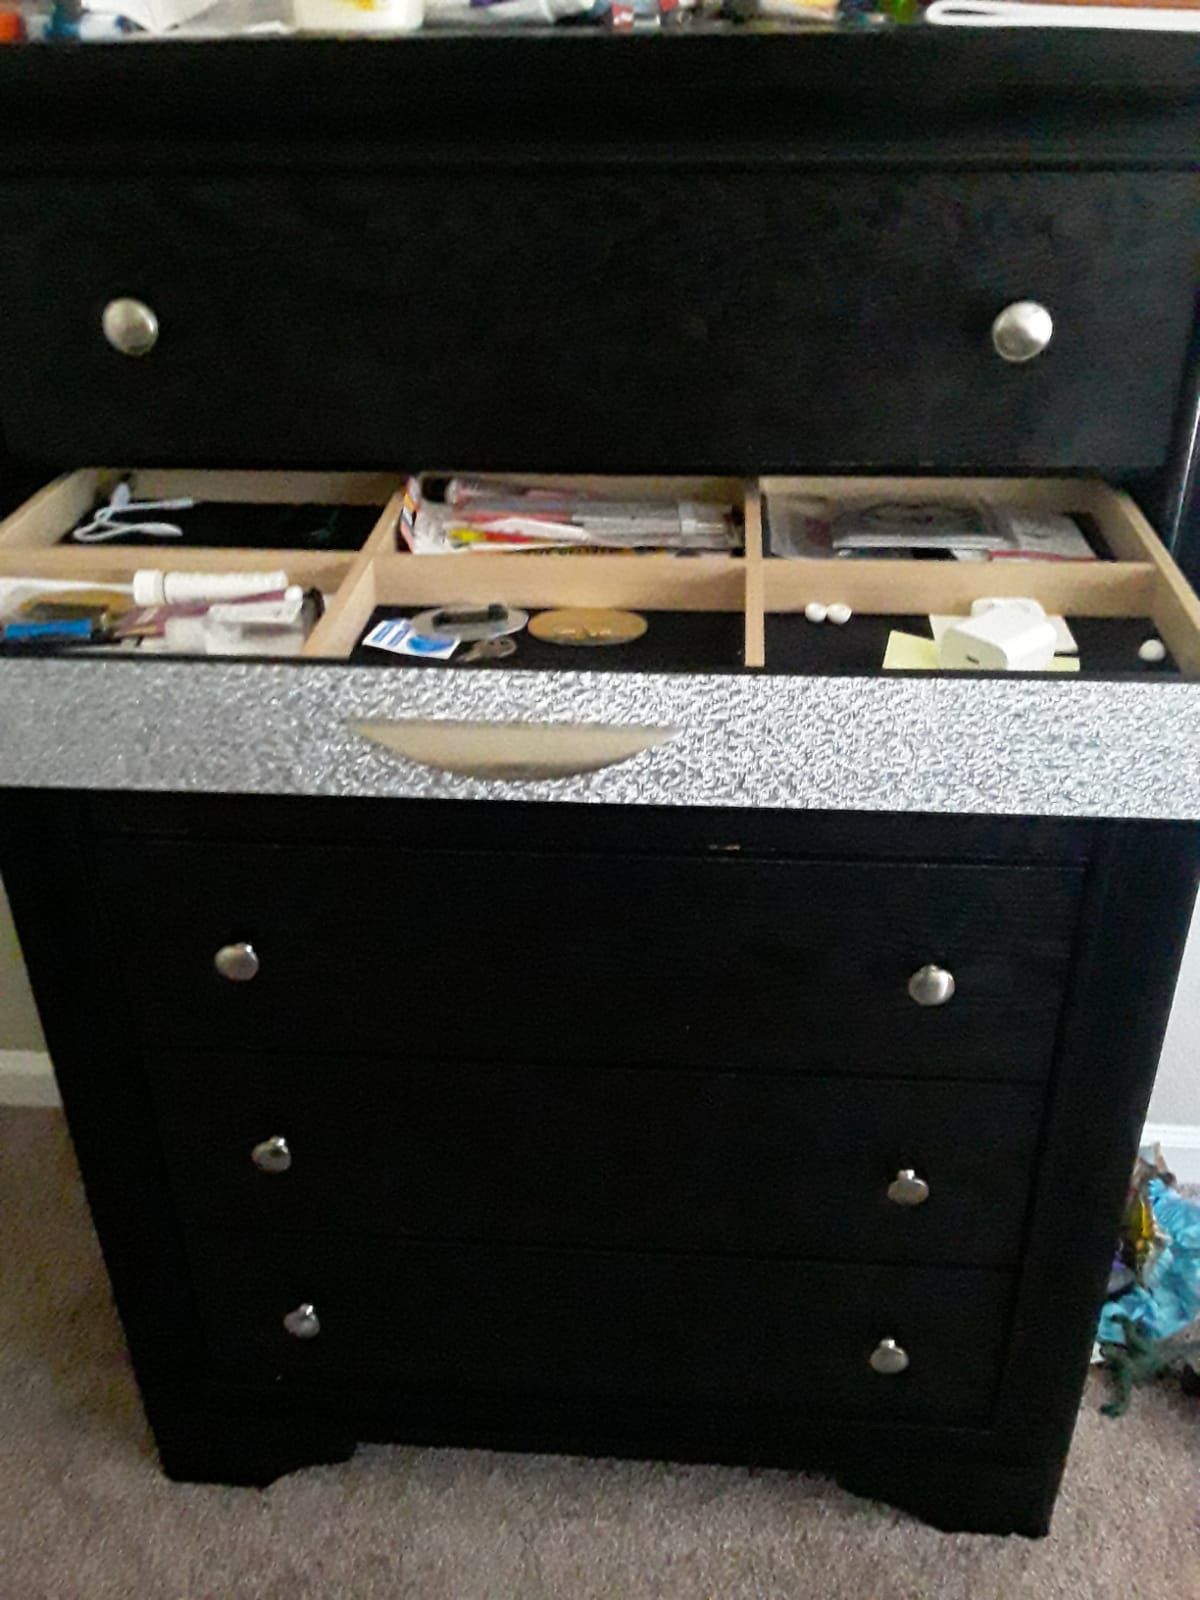 Sleek 5-Drawer Chest in Black and Grey with Bonus Pull-Out for Extra Storage!